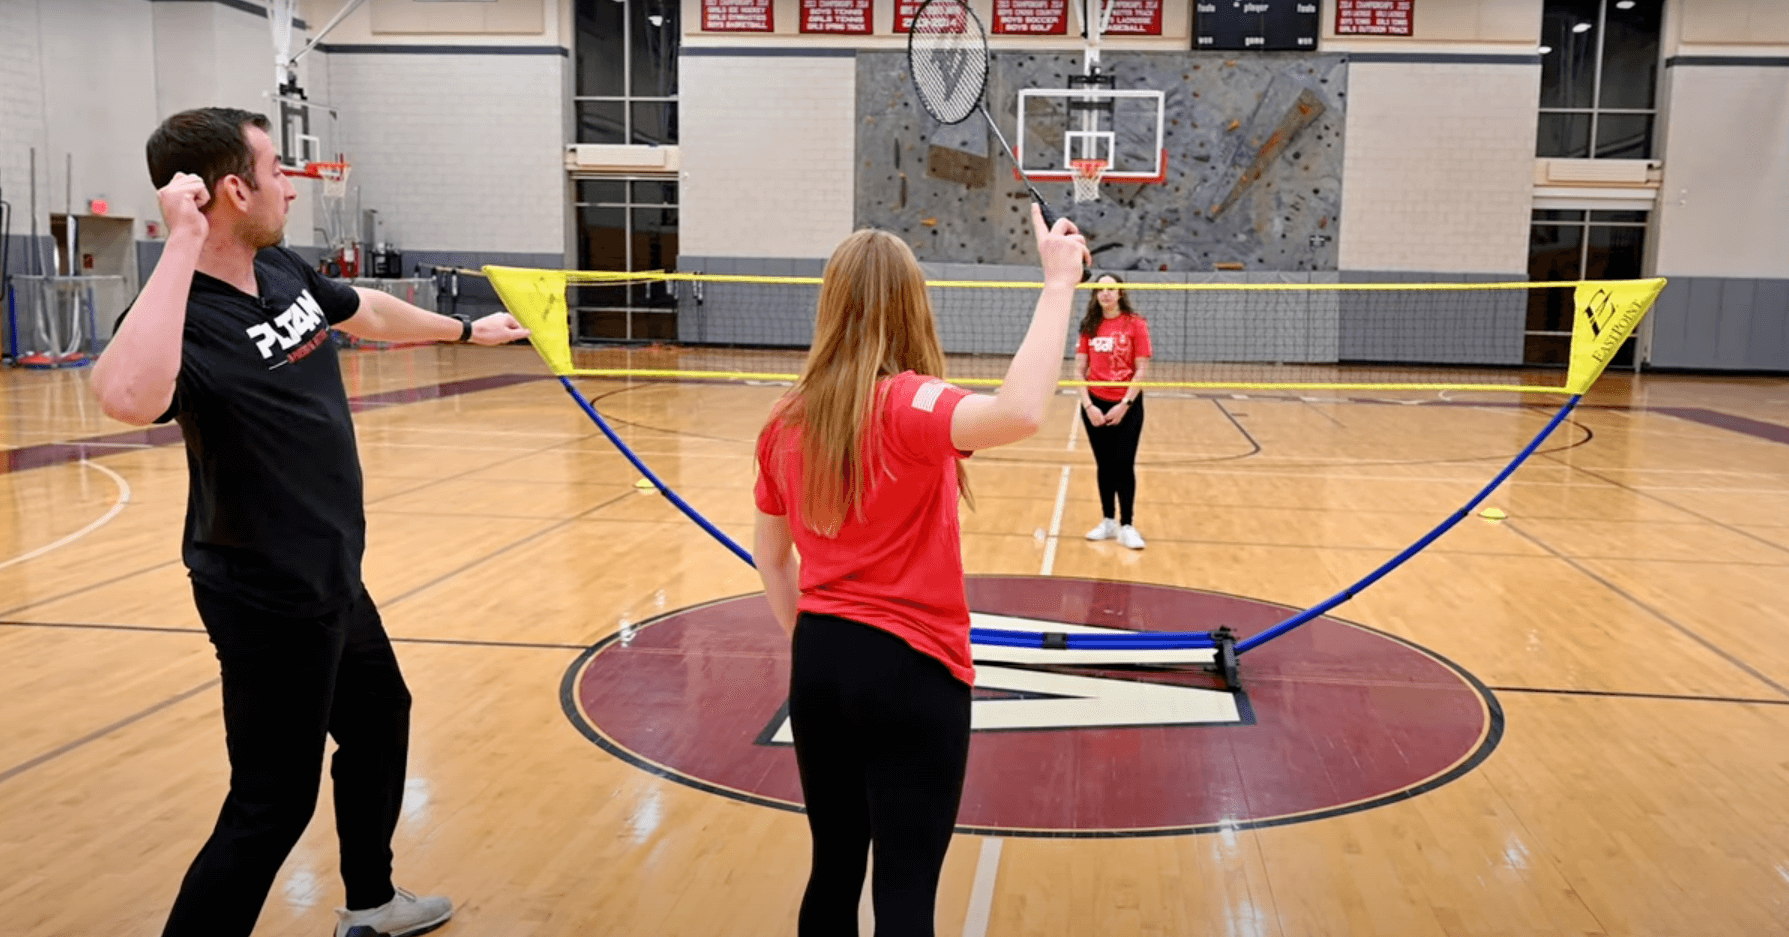 Image from PLT4M's badminton lesson plans reviewing overhand forehand swing.